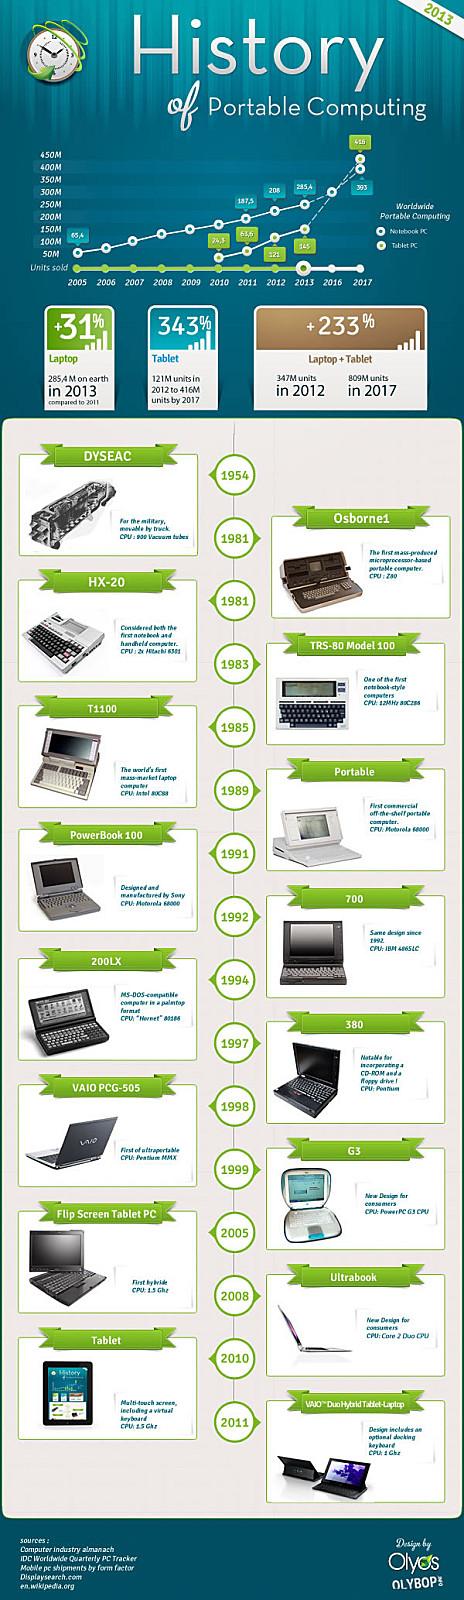 Sony-Branding-Infographie-Laptop-SMALL